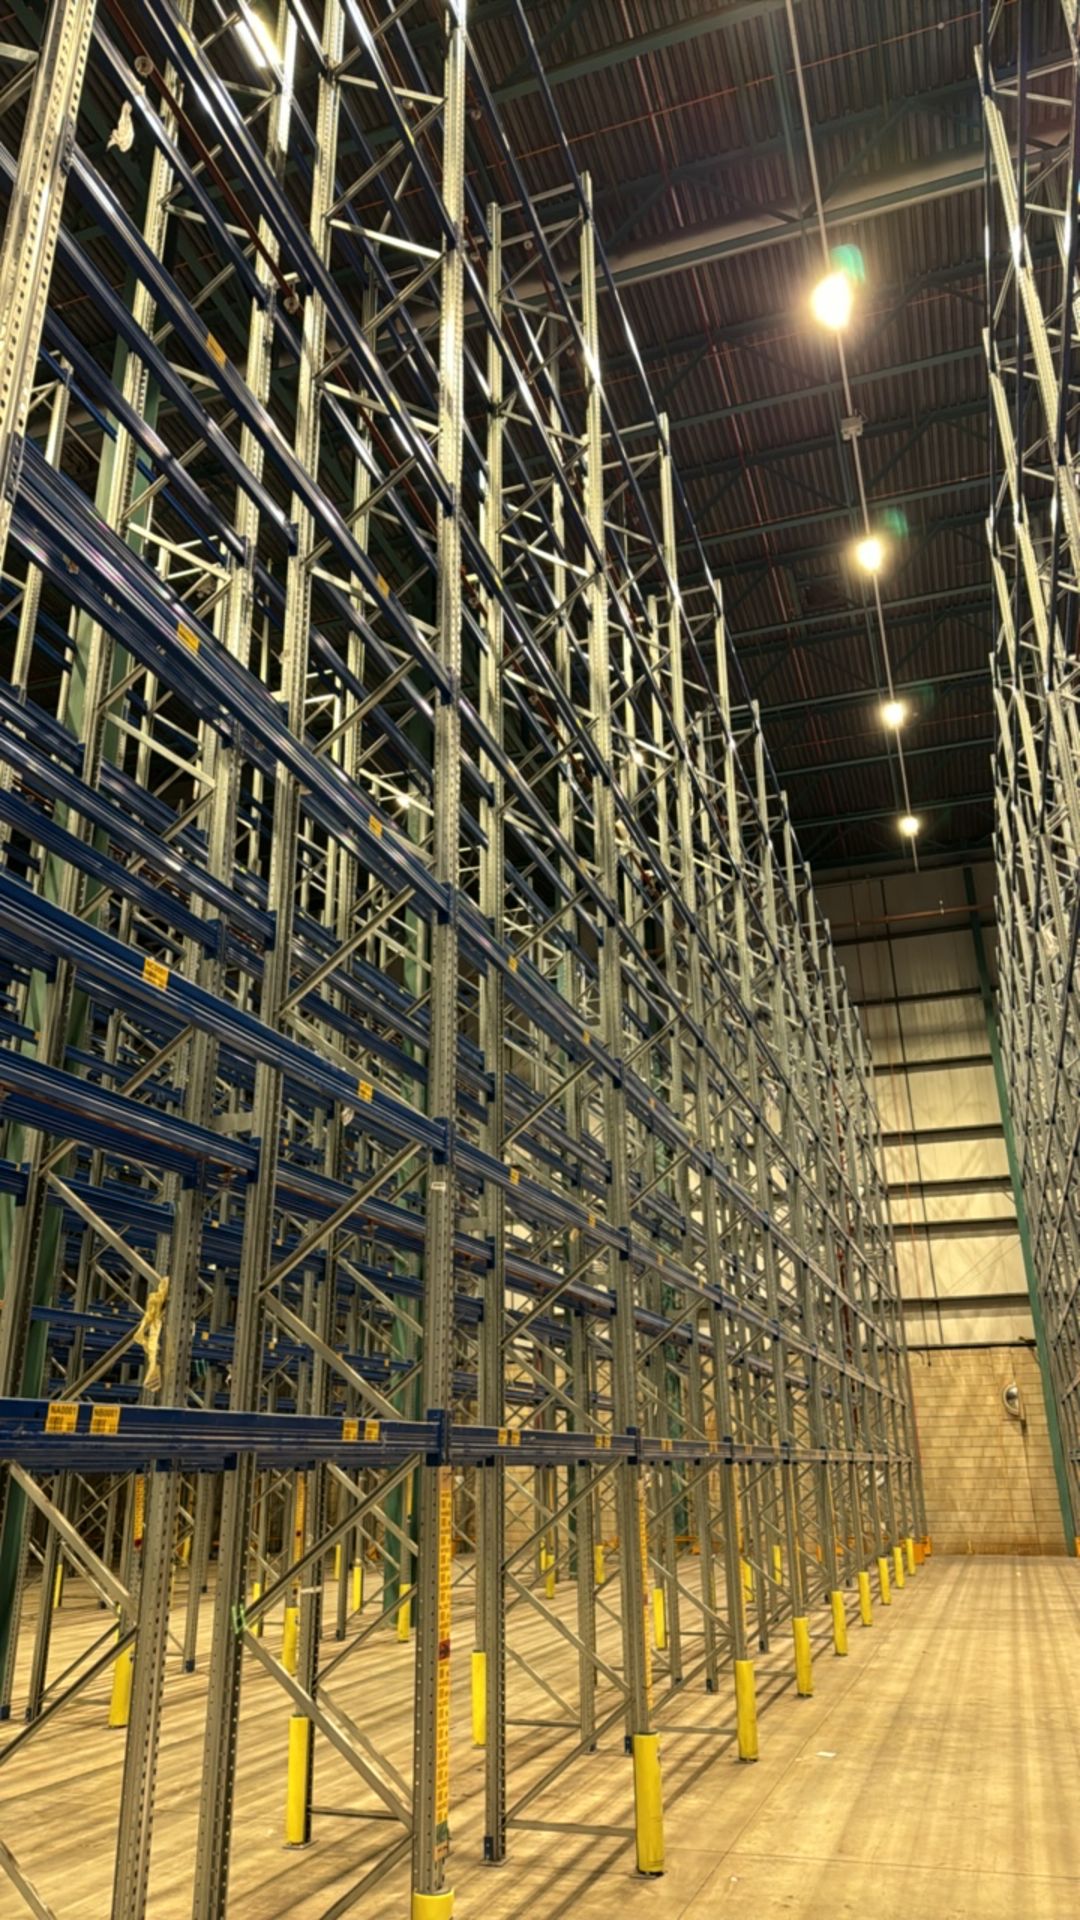 Run Of 32 Bays Of Back To Back Boltless Pallet Racking - Image 4 of 10